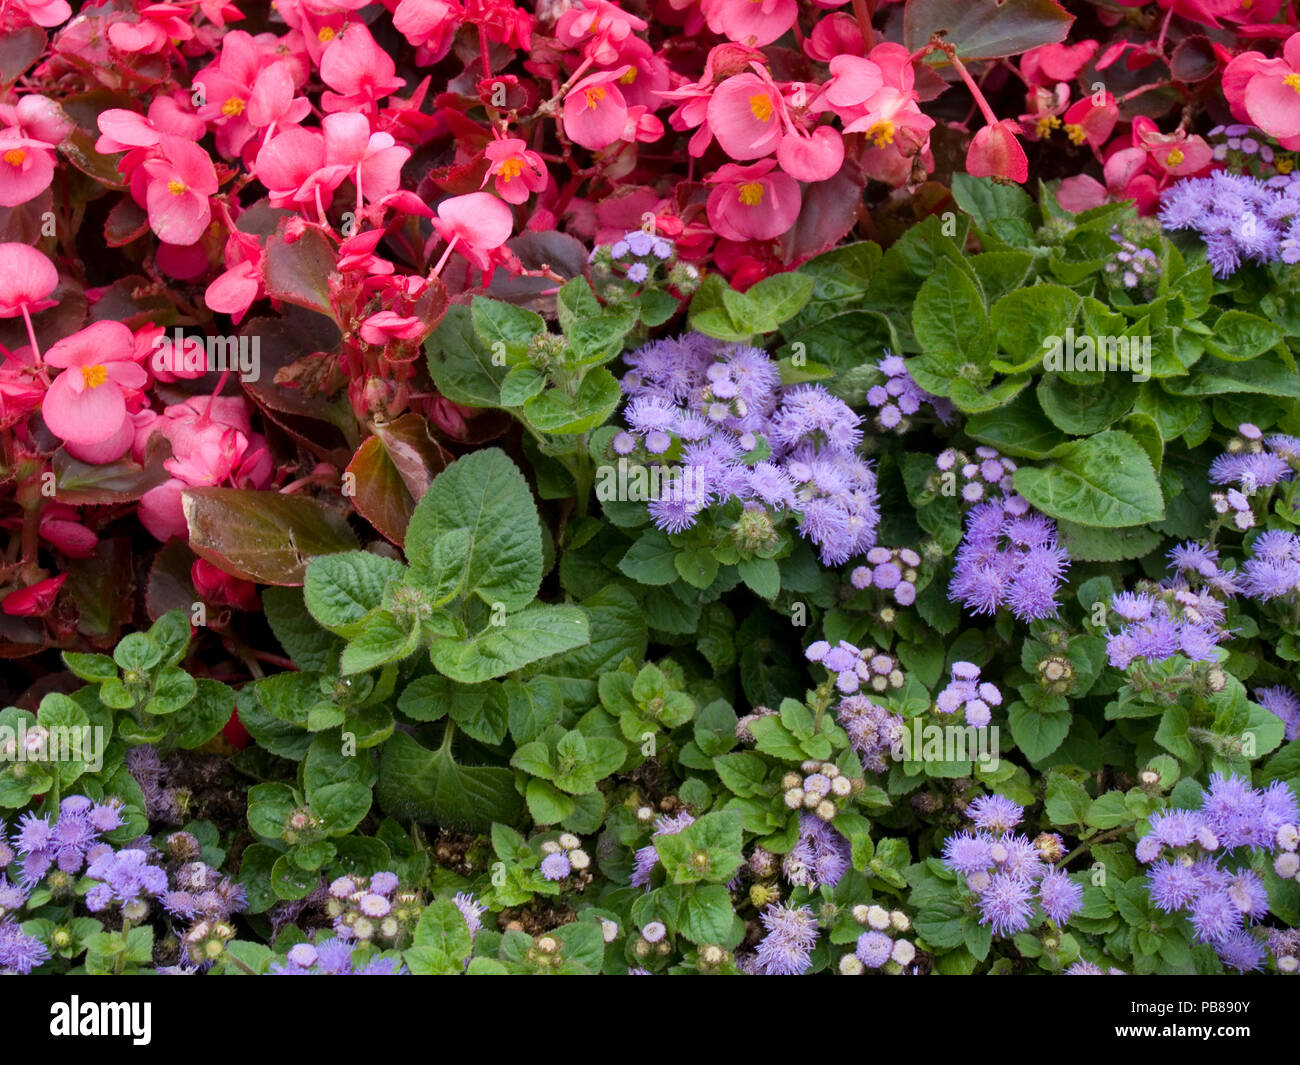 Begonia and Ageratum flowers on the bed Stock Photo